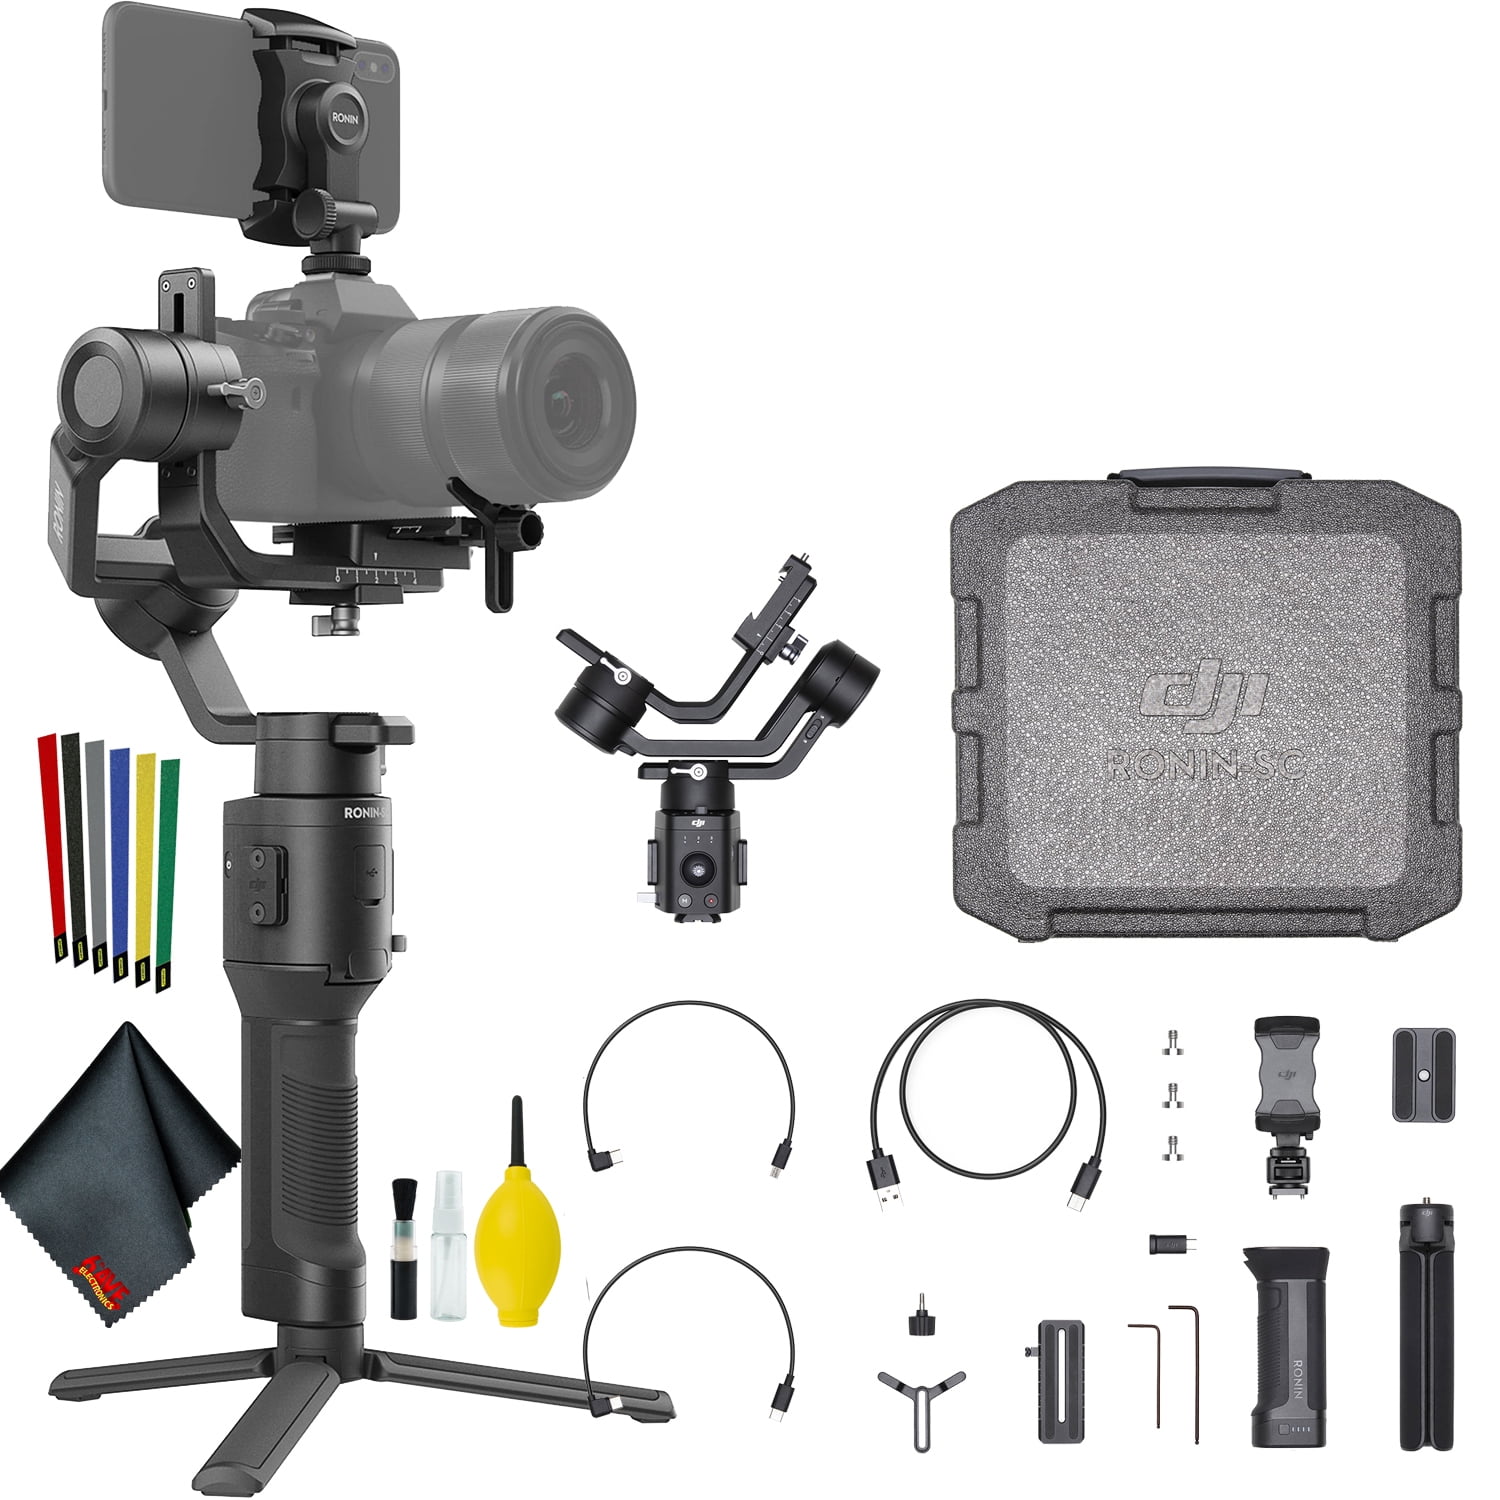 DJI Ronin-SC Gimbal Stabilizer with All-in-one Control for DSLR